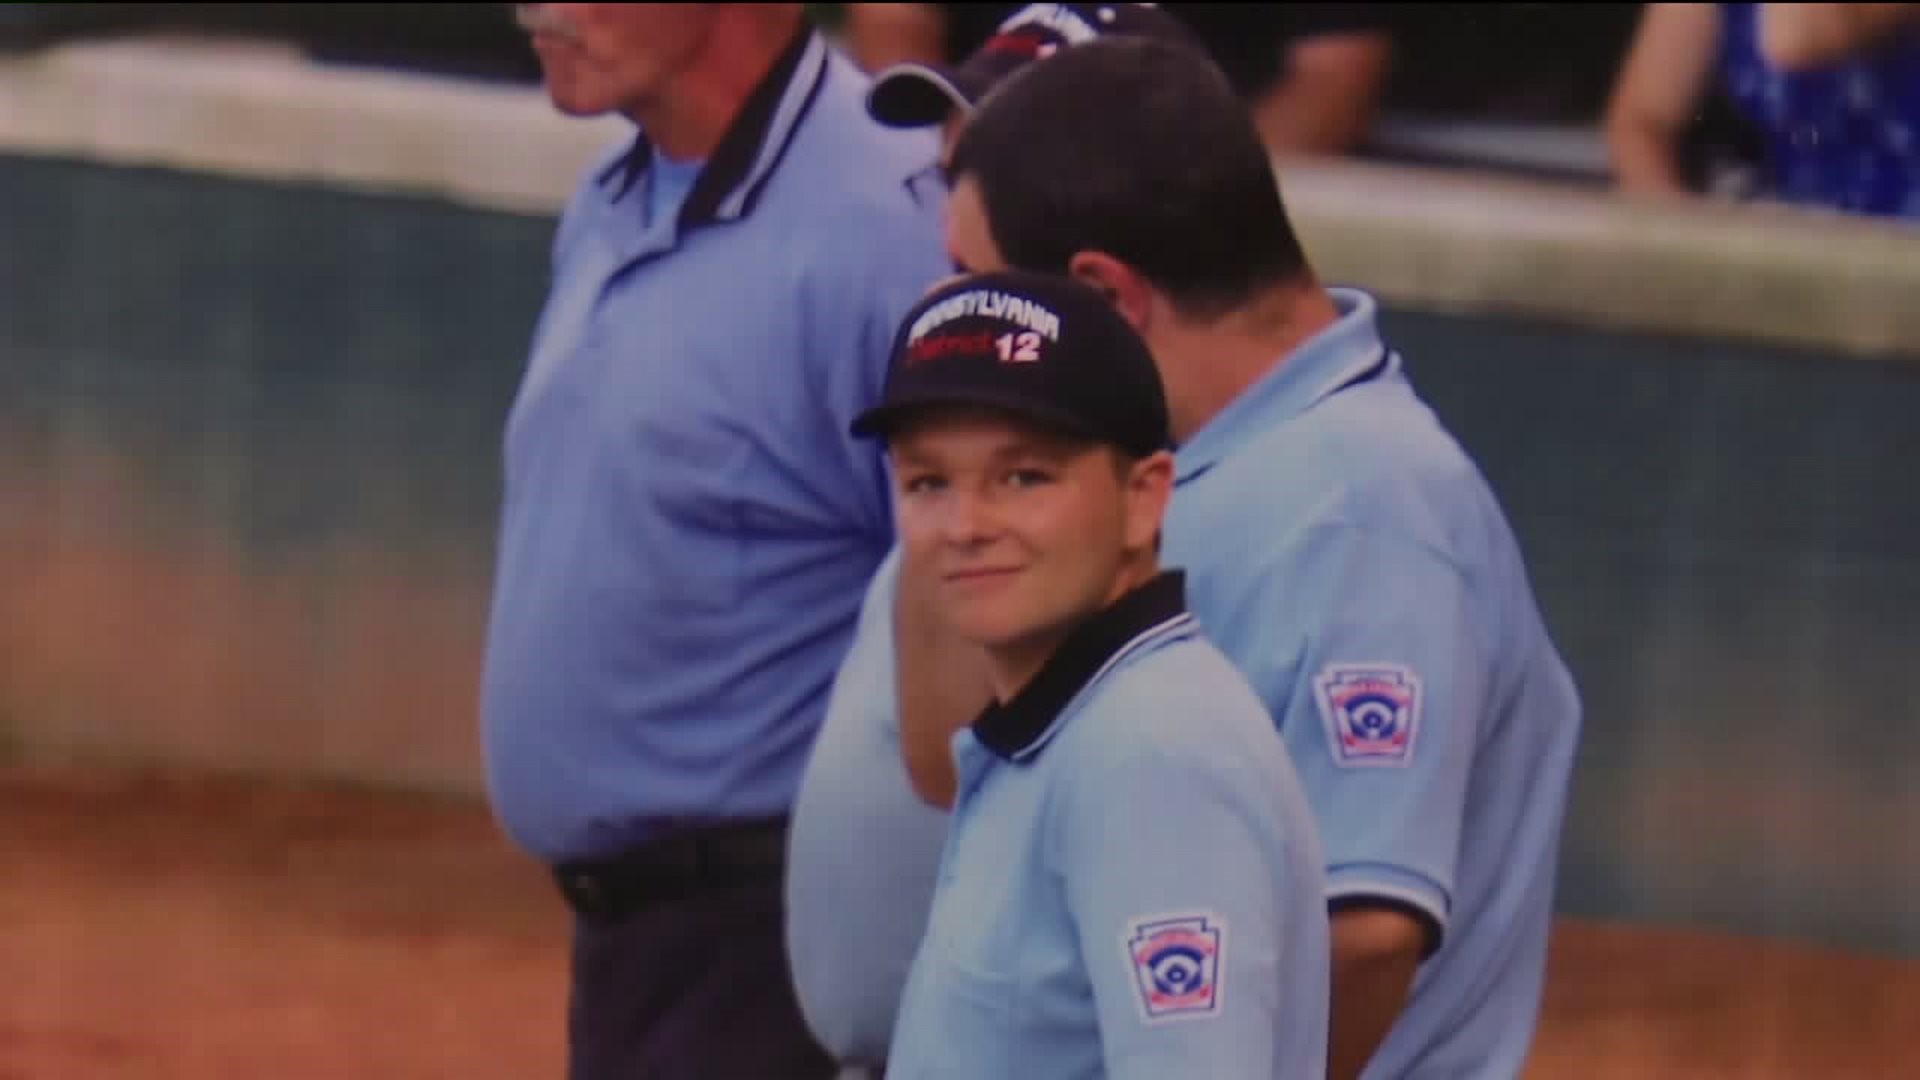 Teen Prefers View Behind the Plate